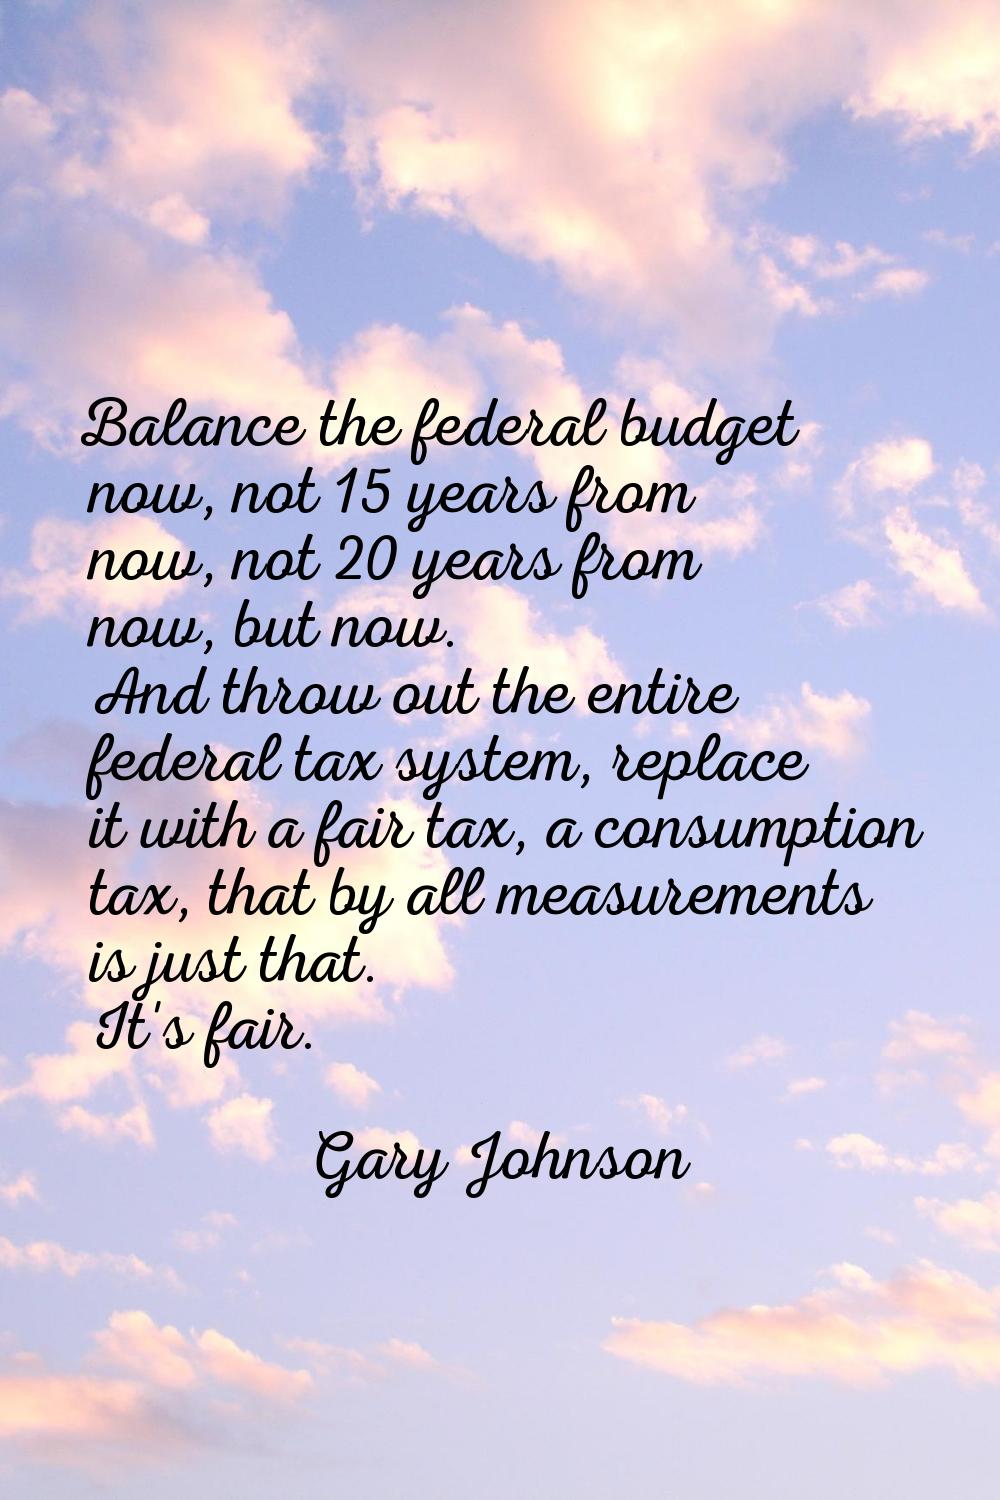 Balance the federal budget now, not 15 years from now, not 20 years from now, but now. And throw ou